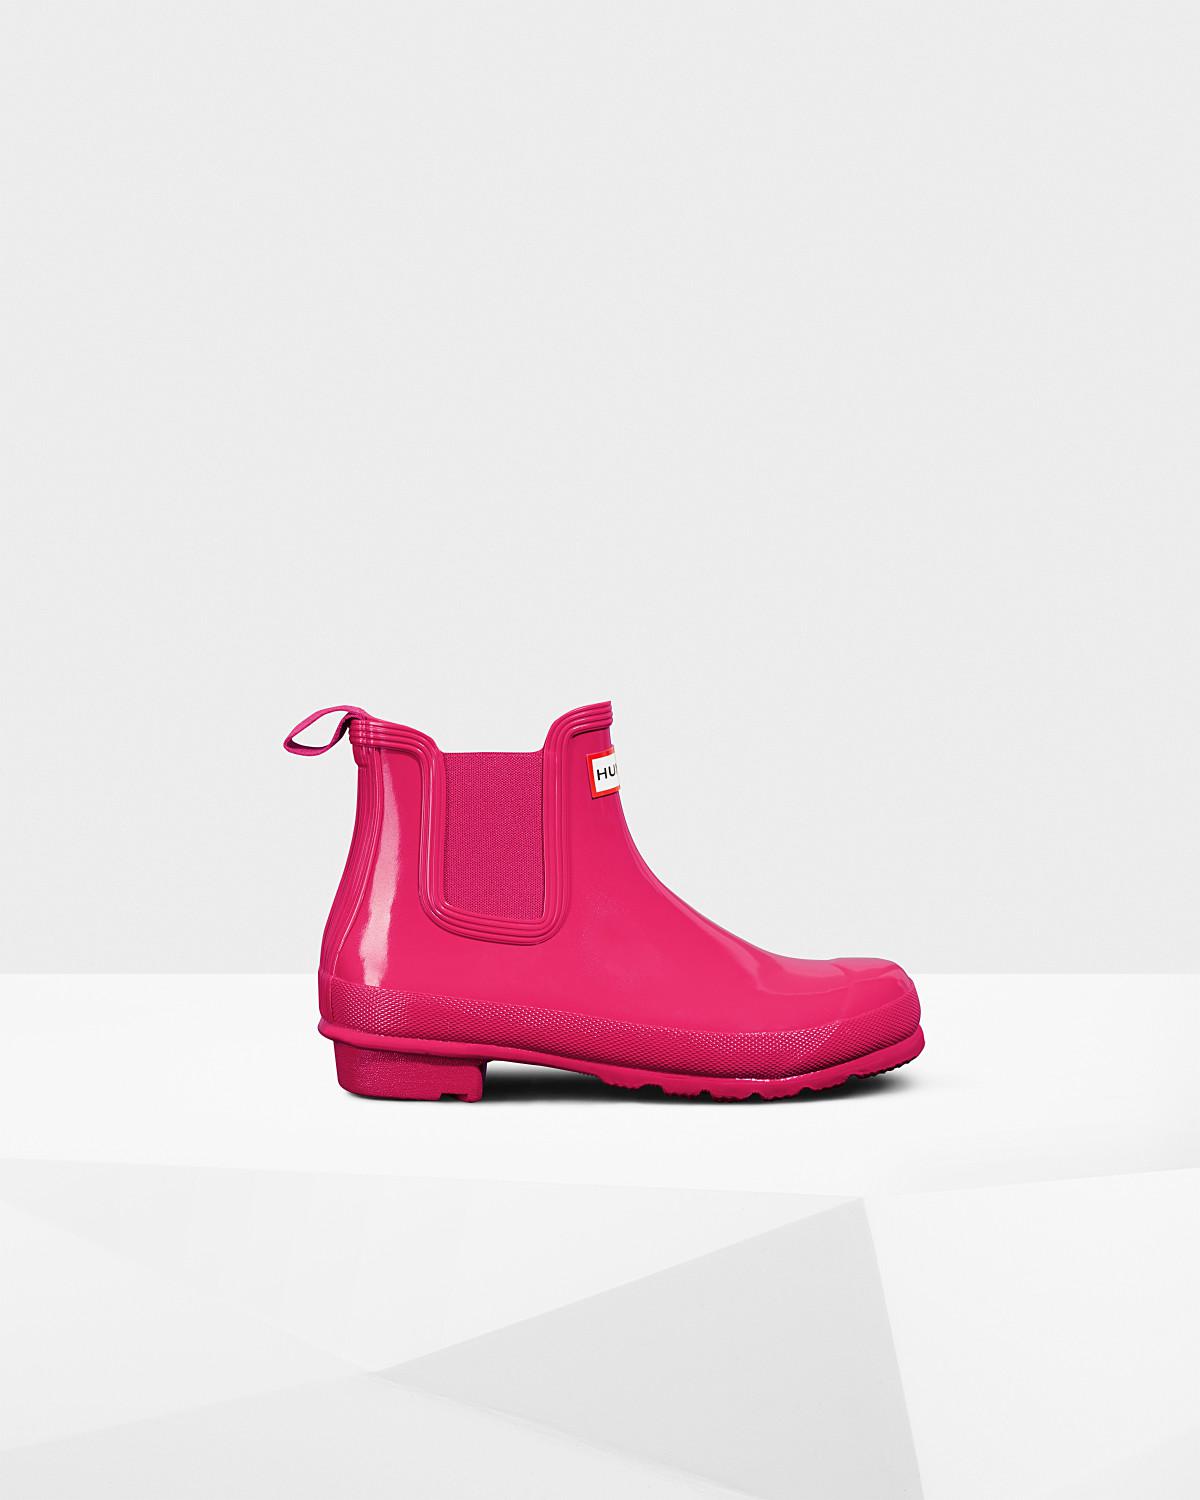 HUNTER Rubber Women's Original Chelsea Boots in Bright Pink (Pink) | Lyst